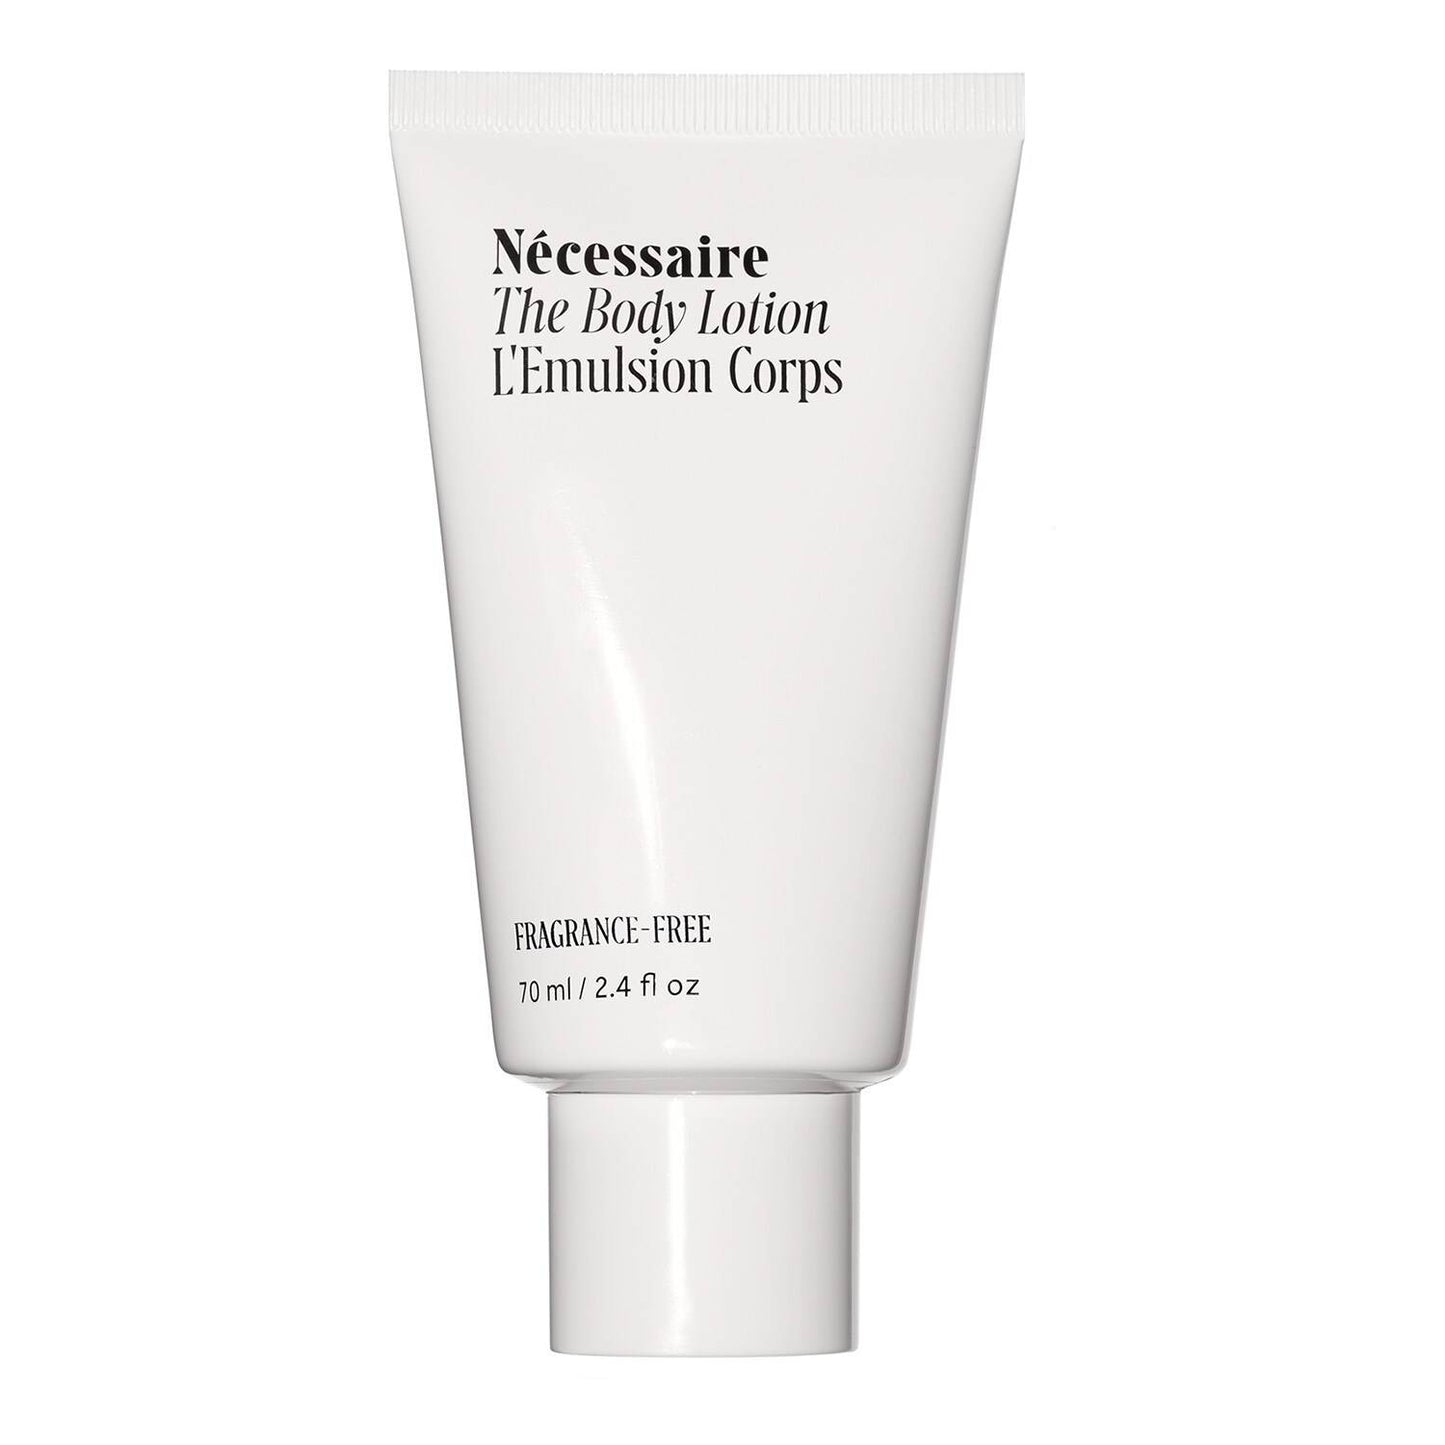 NECESSAIRE The Body Lotion Fragrance-Free Travel Size 70ml